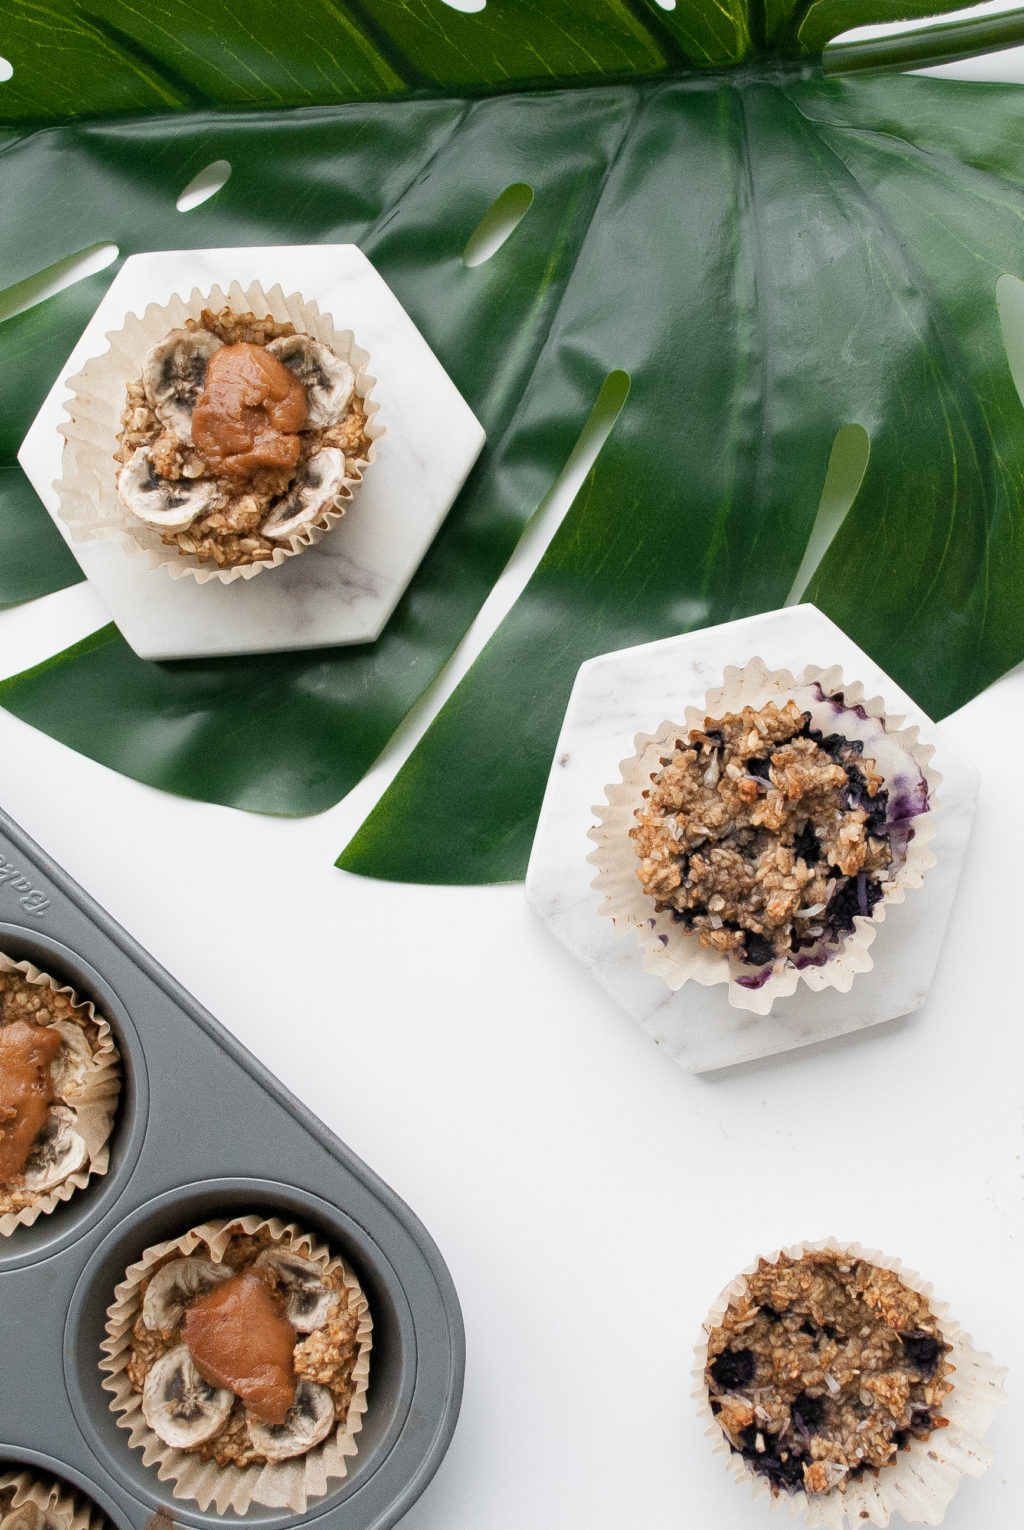 Bird's-eye view of two baked banana oatmeal cups next a muffin tray on top of a tropical leaf and a white backdrop.